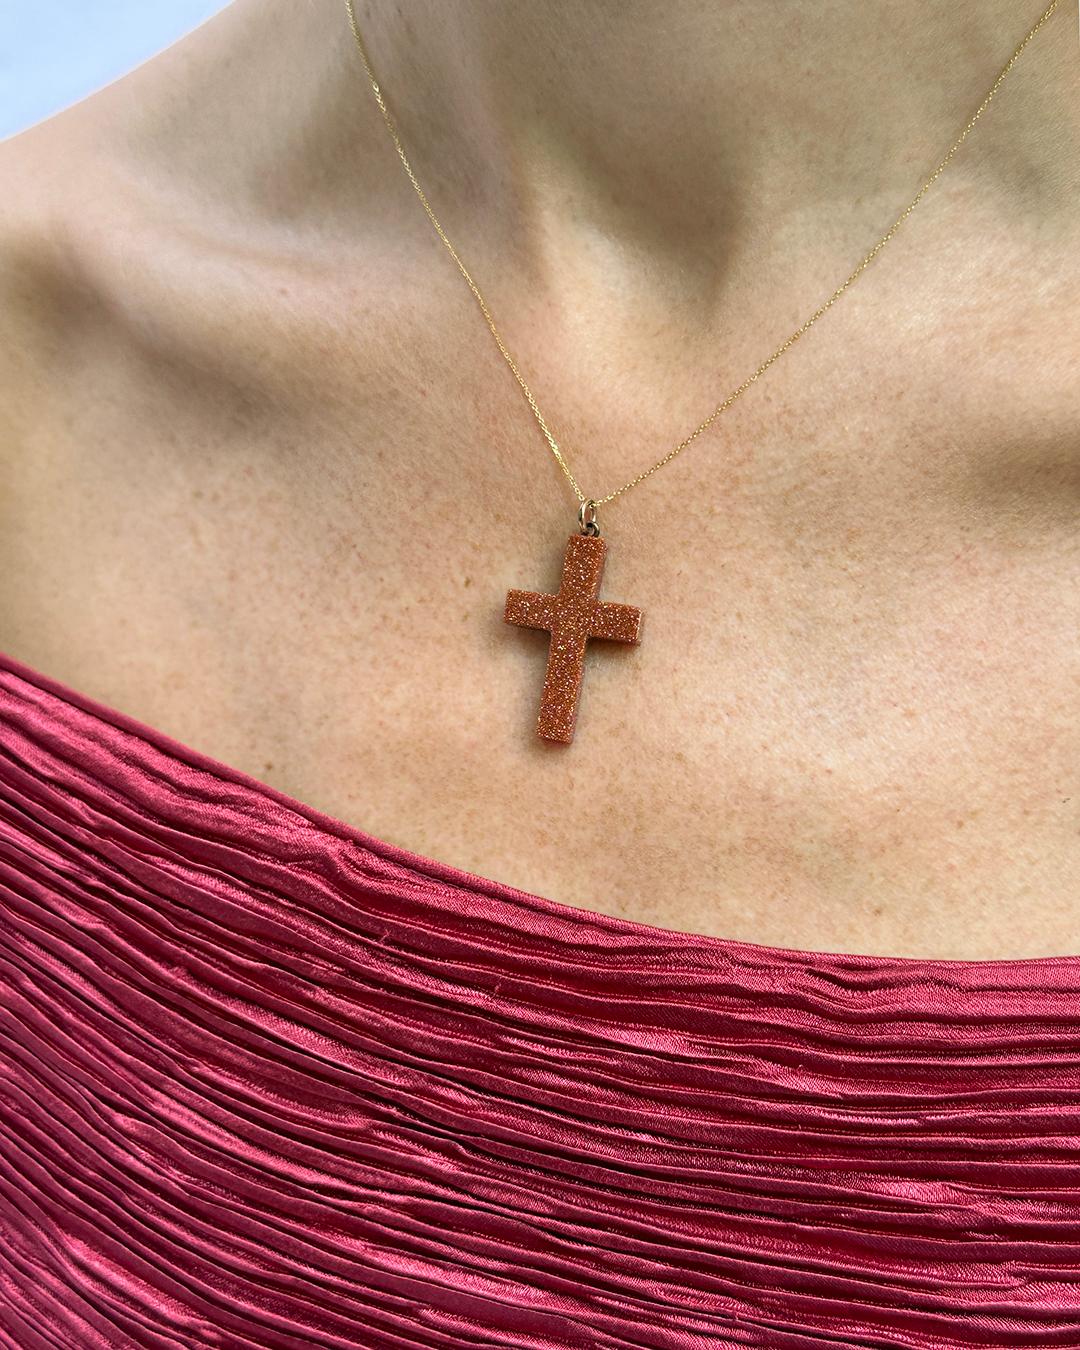 This antique goldstone cross was made in the 19th century, but it has a decidedly modern appeal. The cross's goldstone surface is a burnt orange color, with metallic flecks that sparkle with every movement. What is goldstone? Legend has it that